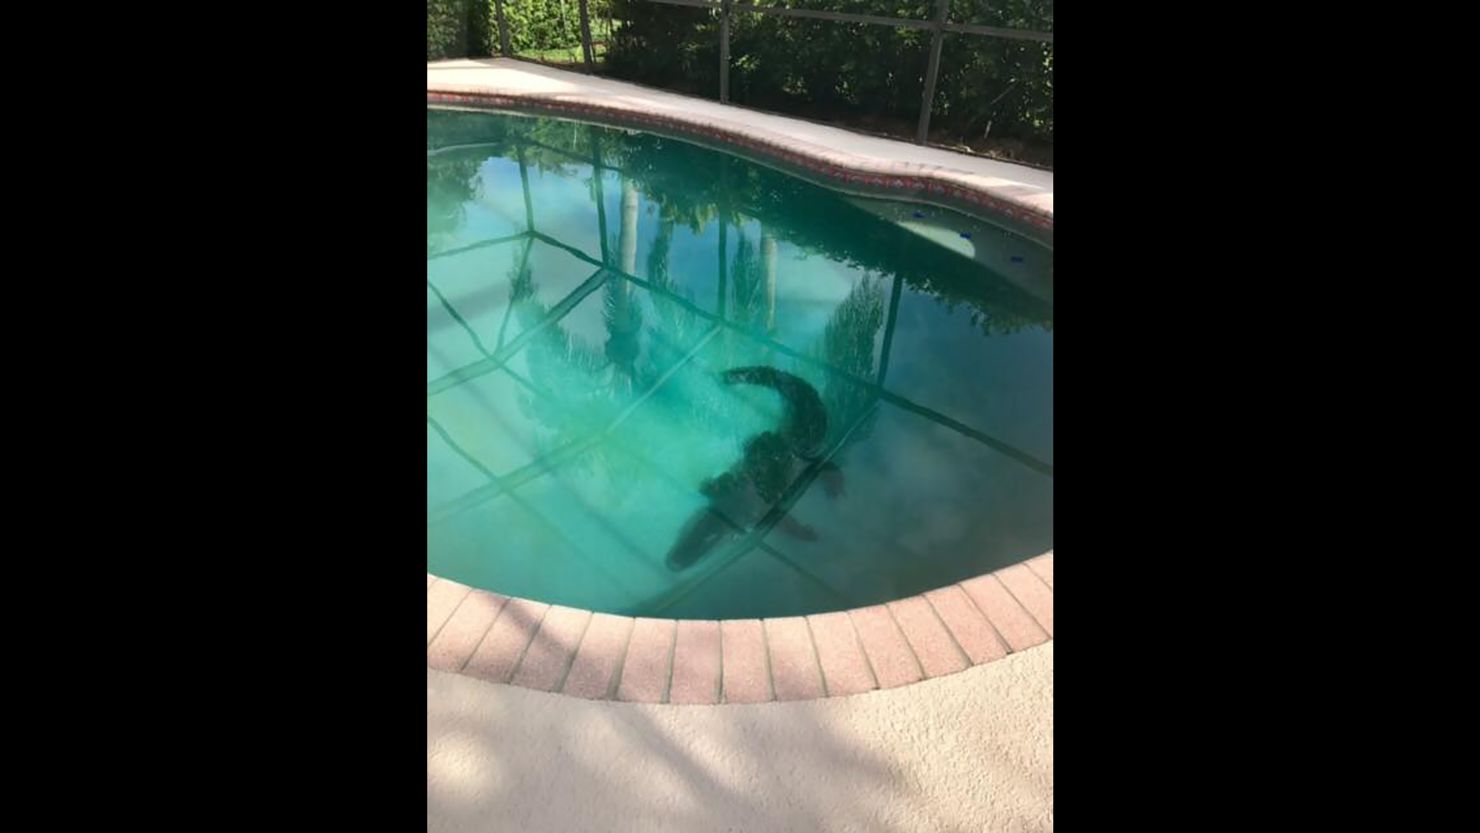 A family found this 8-foot alligator in their Venice, Florida, swimming pool over Memorial Day weekend.